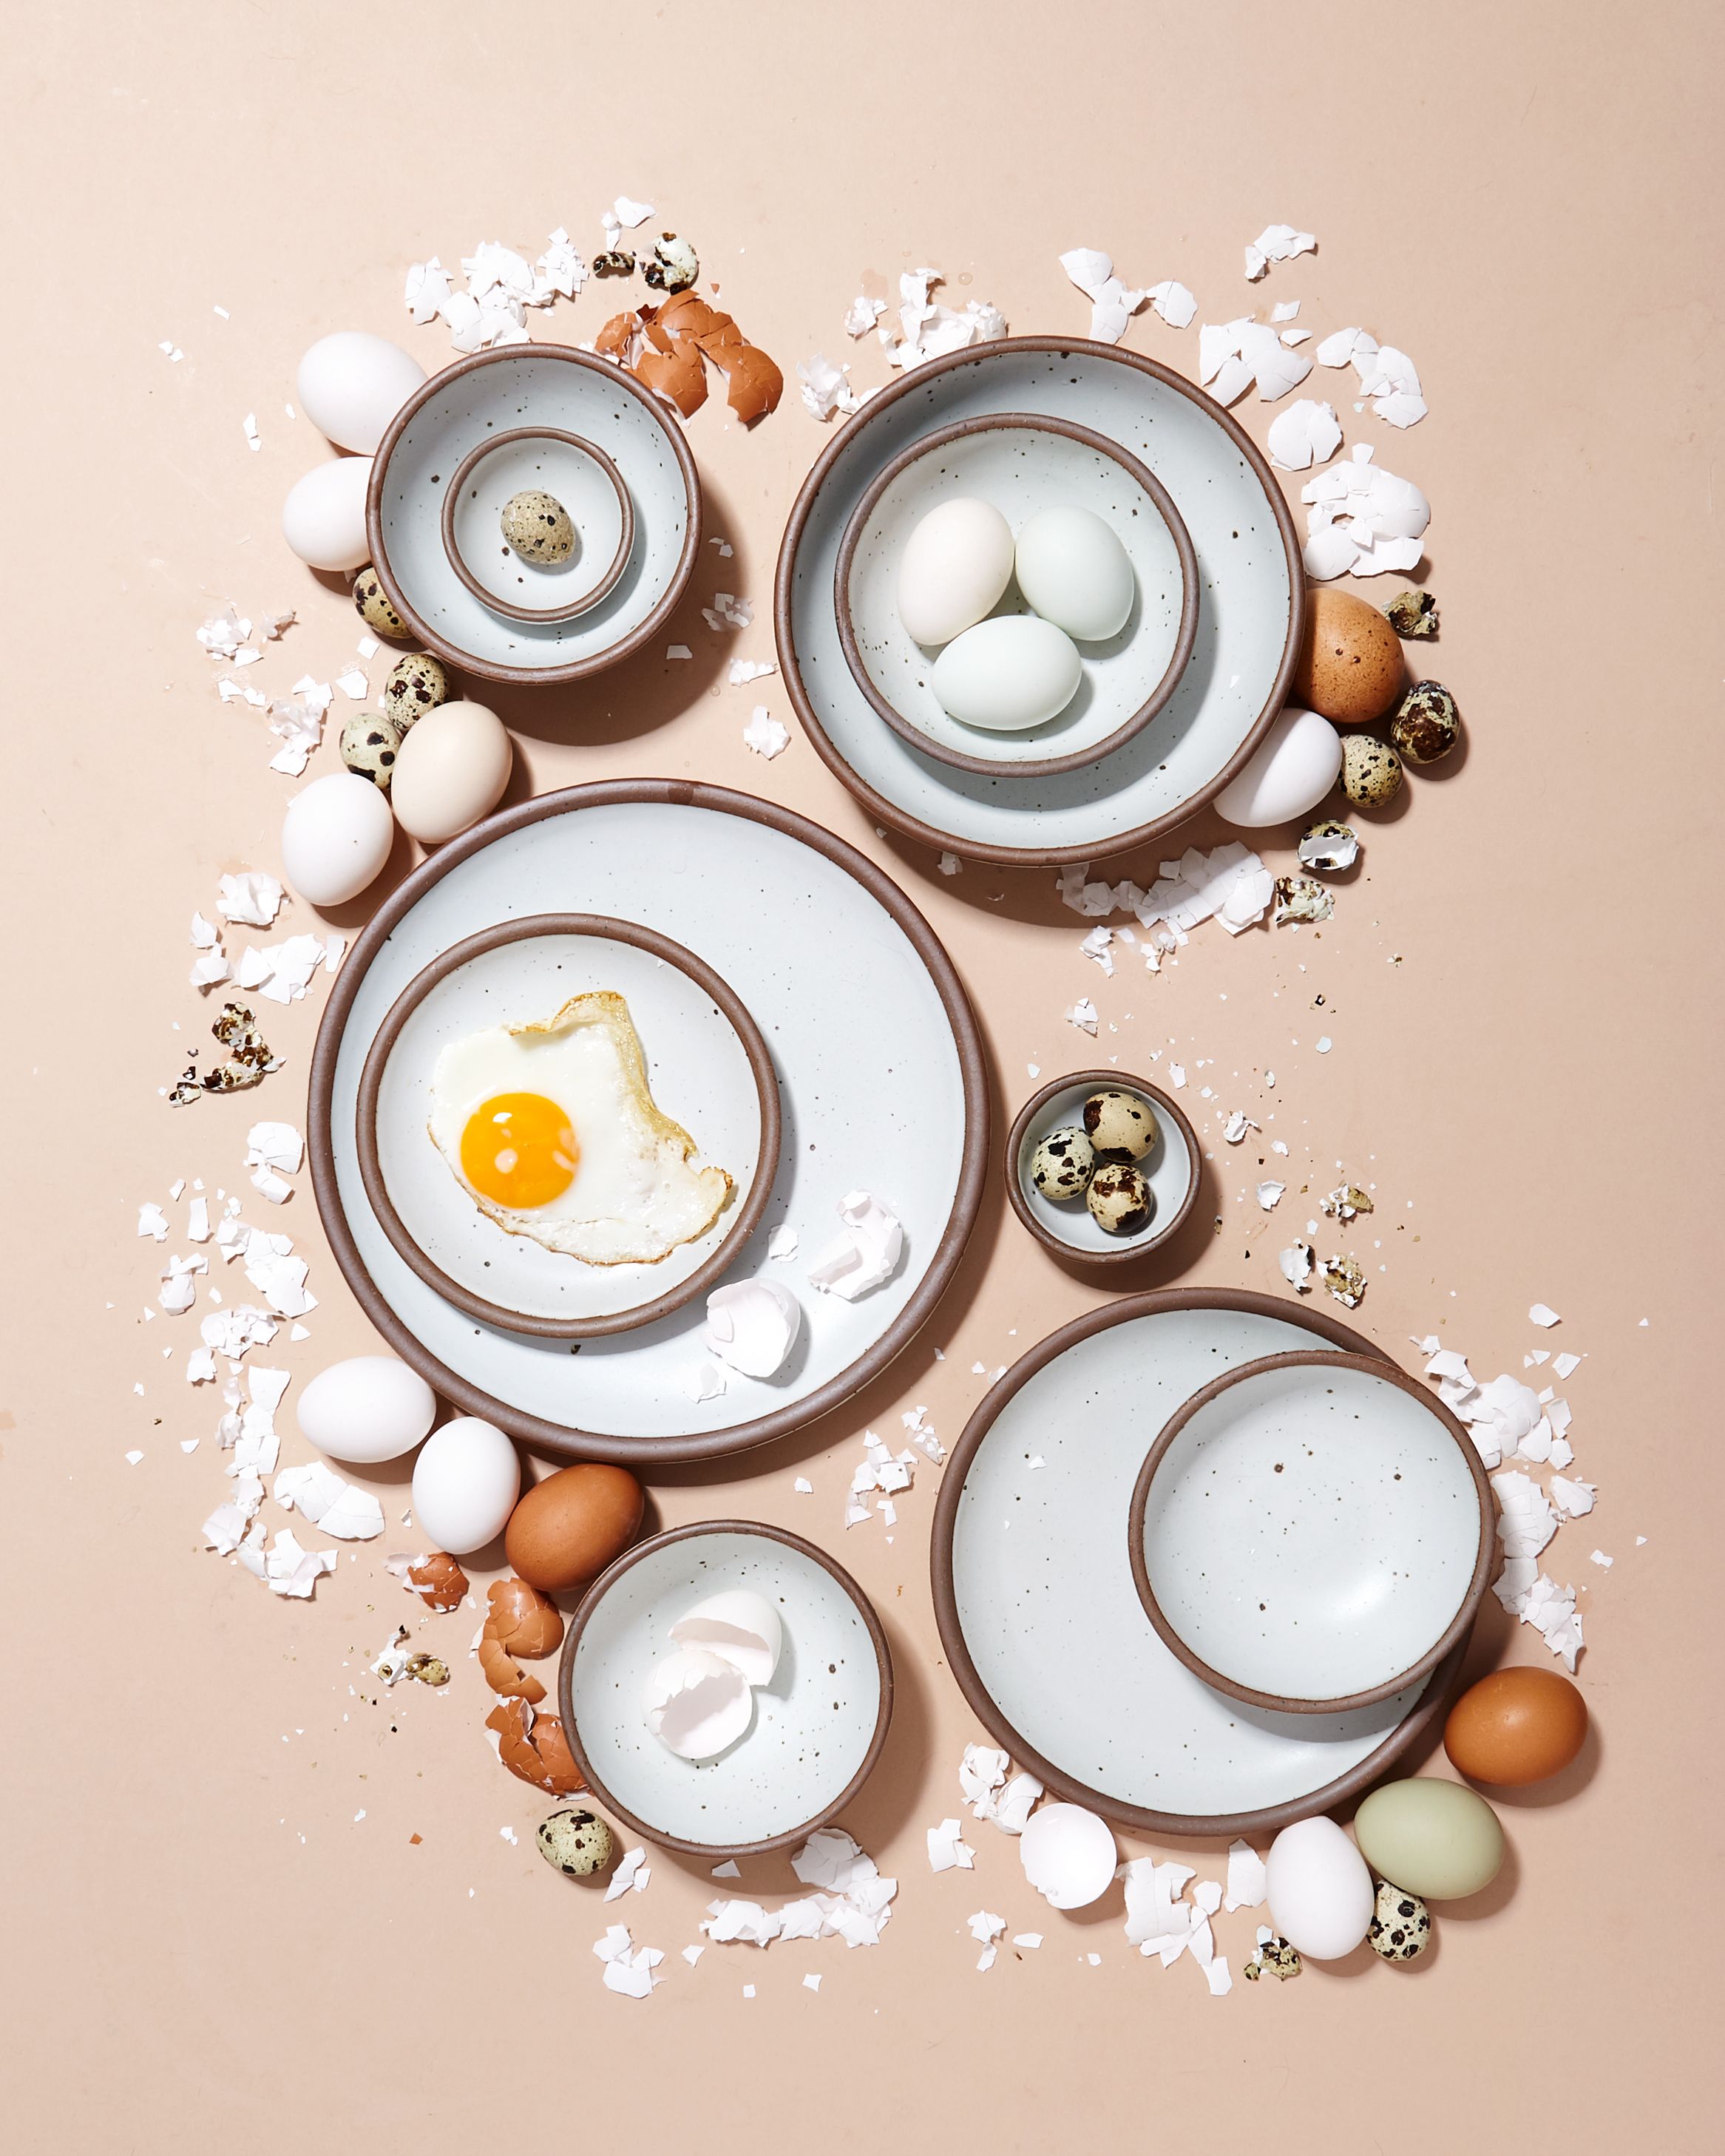 An overhead view of ceramic bowls and plates in various sizes in soft cool white and surrounded by eggshells and different kinds of eggs.